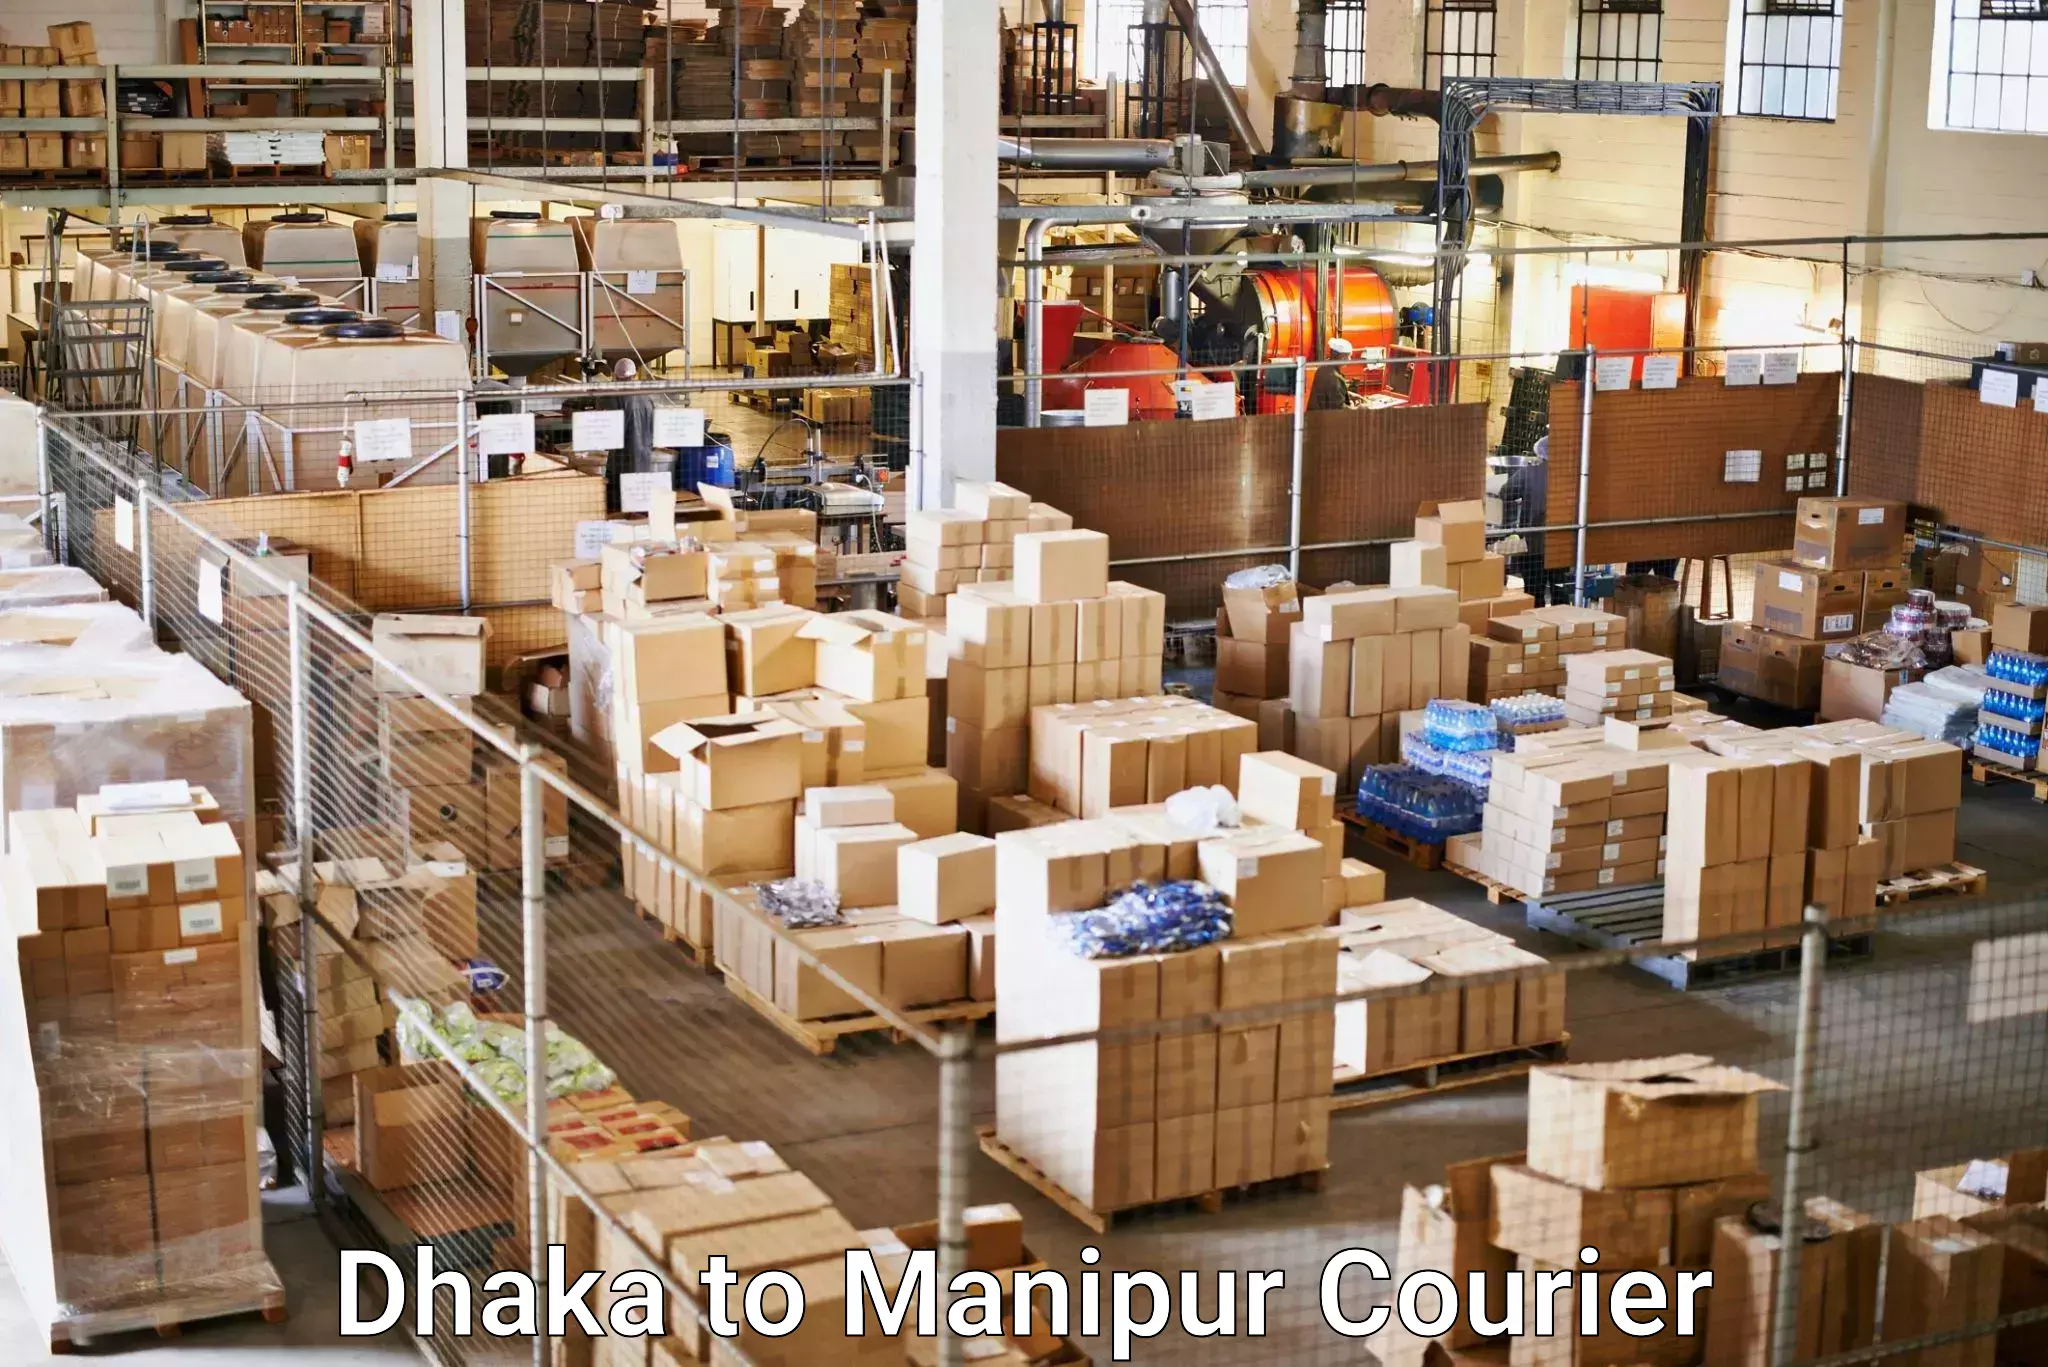 Subscription-based courier Dhaka to Manipur